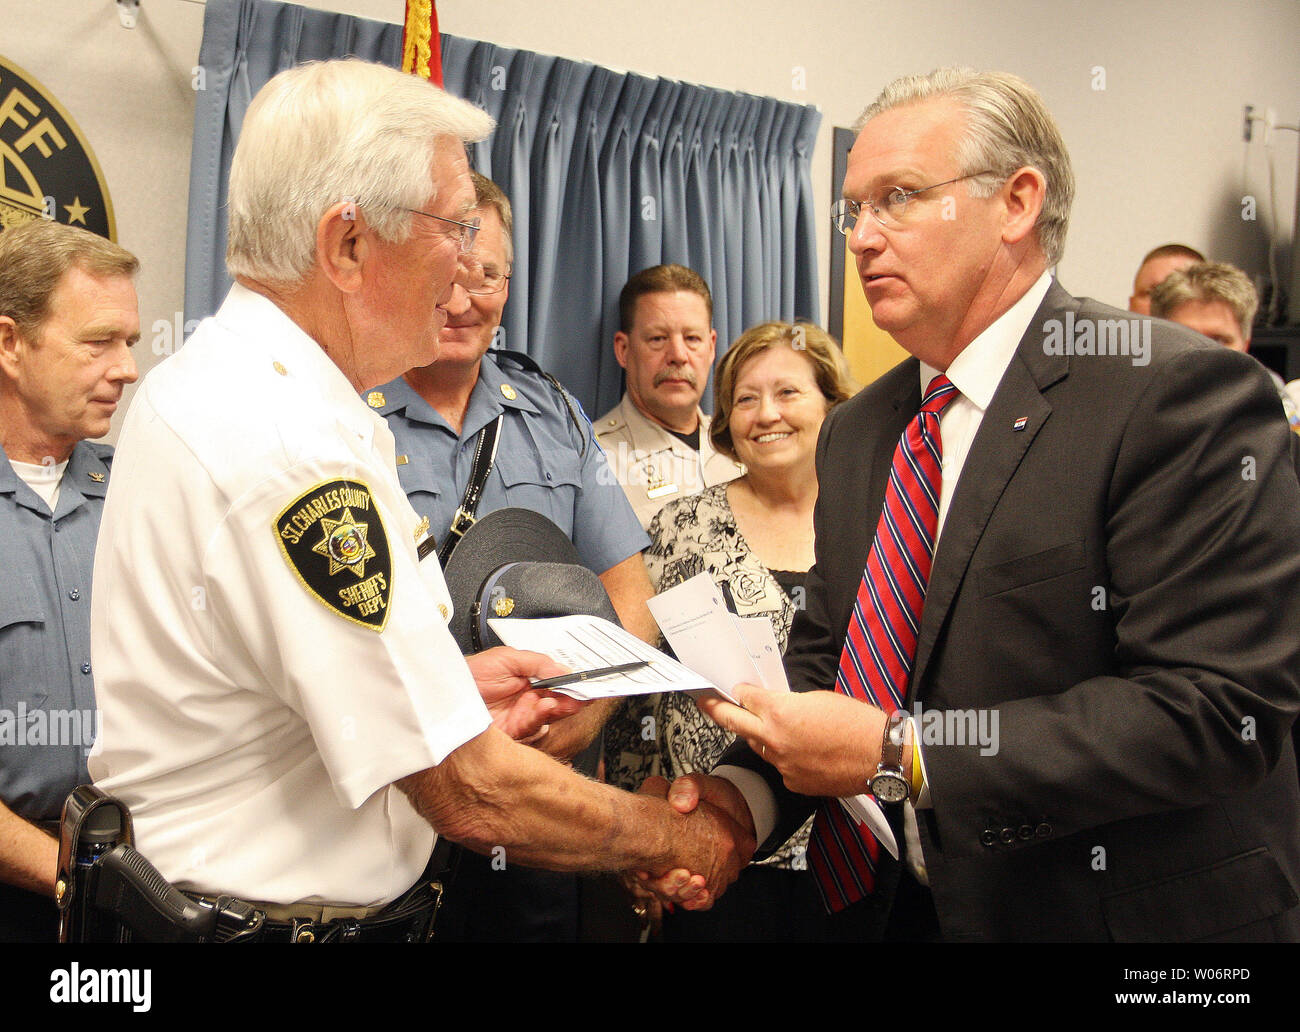 Missouri Governor Jay Nixon (R) presents St. Charles County Sheriff Tom Neer with the first copy of  a bill just signed that makes K2, a new drug in the area, a controlled substance in O'Fallon, Missouri on July 6, 2010. K2, a synthetic substance similar to marijuana, has become popular in recent months.The law bans synthetic compounds that are sprayed on dried herbs and flowers and often sold as incense.The product produces a marijuana-like high when smoked or inhaled. It is sold in smoke shops and gas stations around the state. UPI/Bill Greenblatt Stock Photo